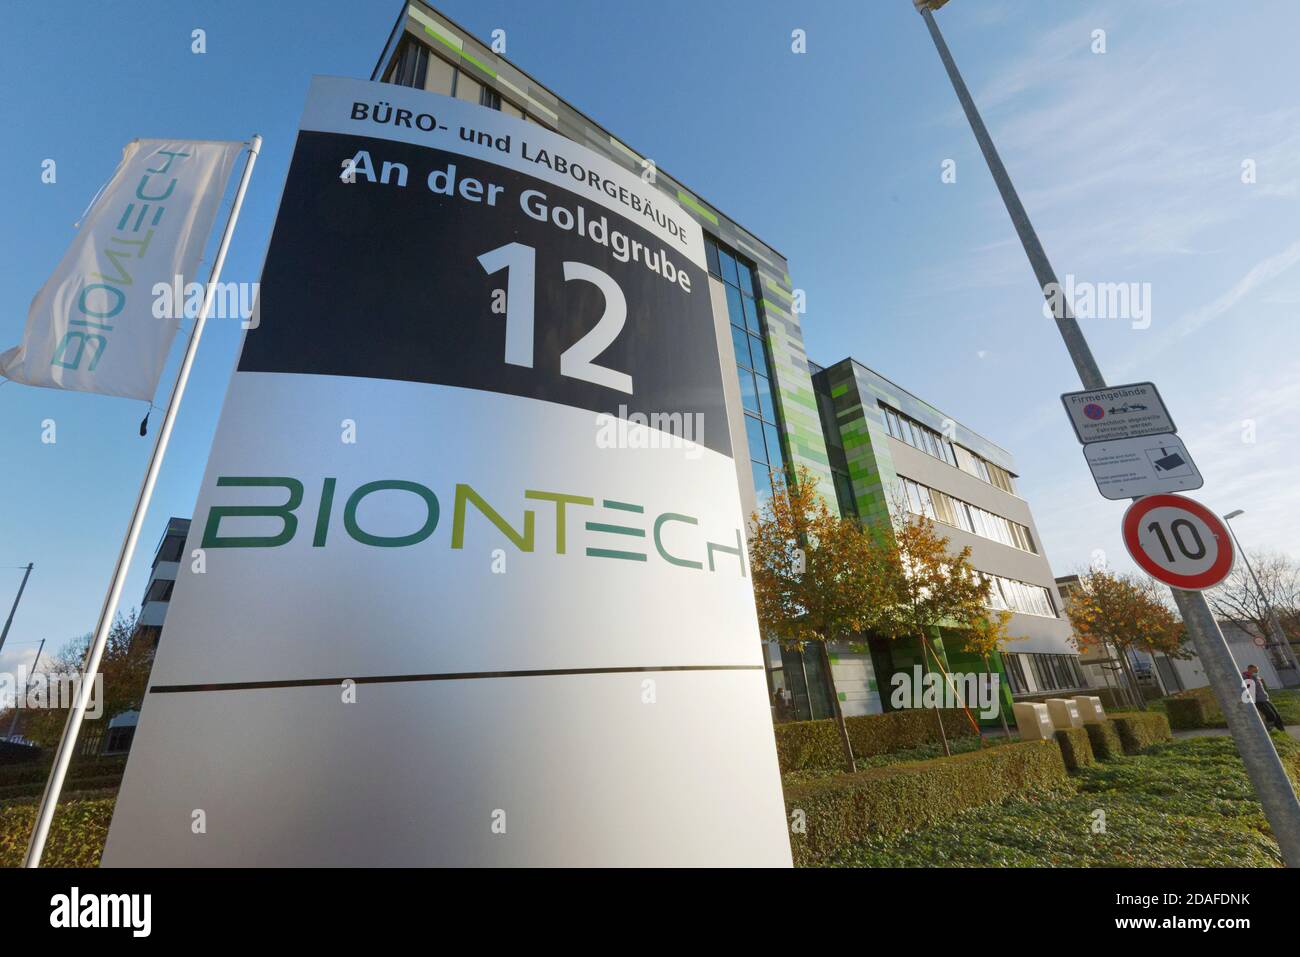 Mainz, Germany - November 12, 2020: The german biotechnology company Biontech conducts research in the field of developing a vaccine against Covid-19. Stock Photo